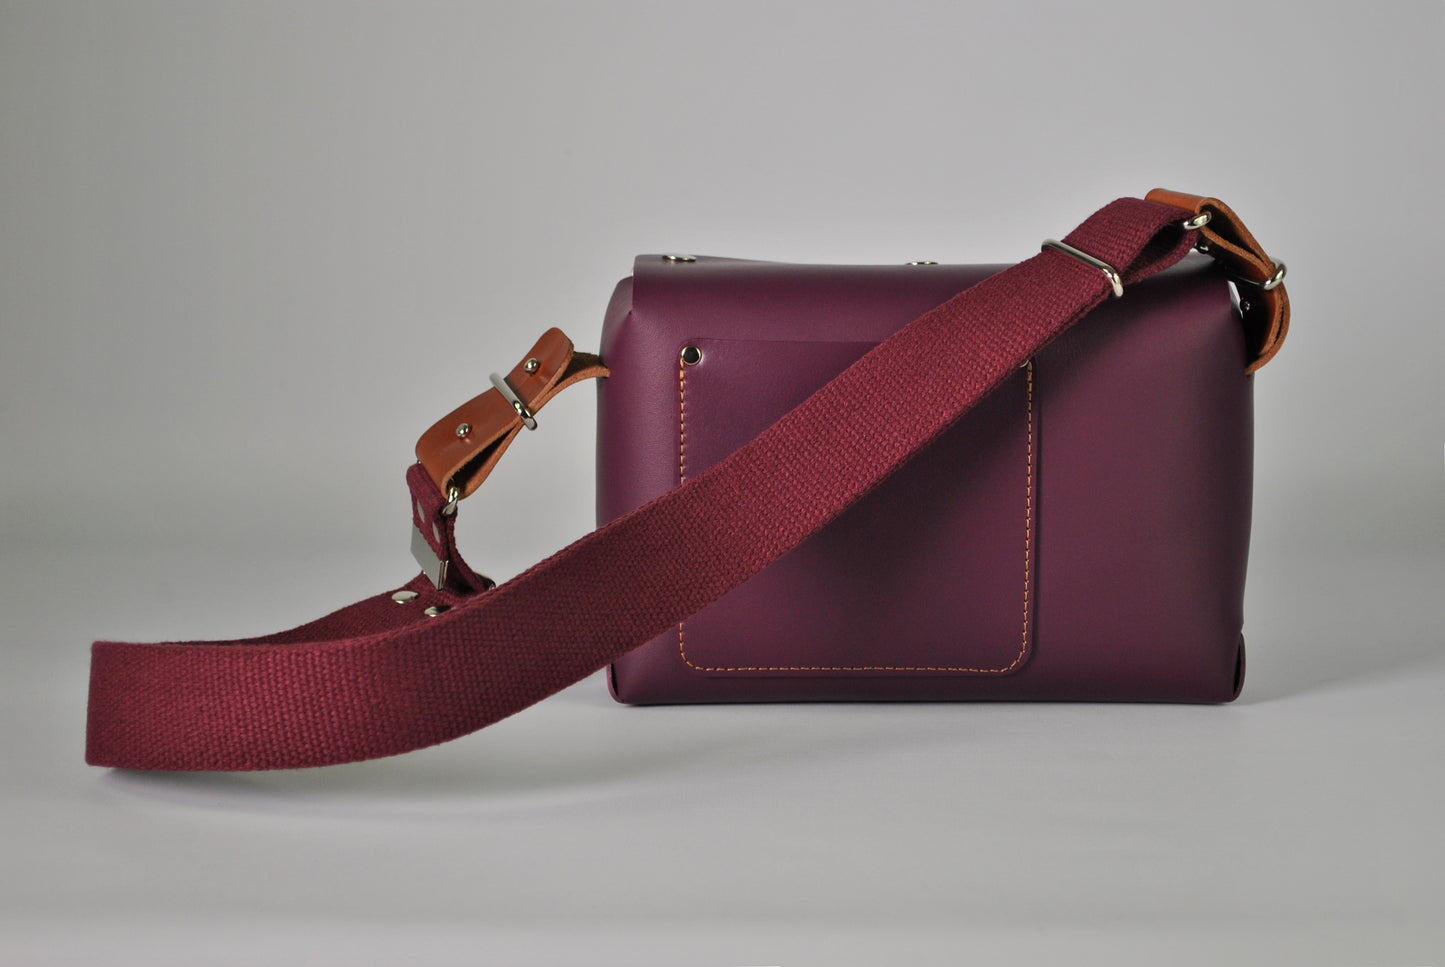 YOU CHOOSE Maroon Cotton Strap. Strap Only